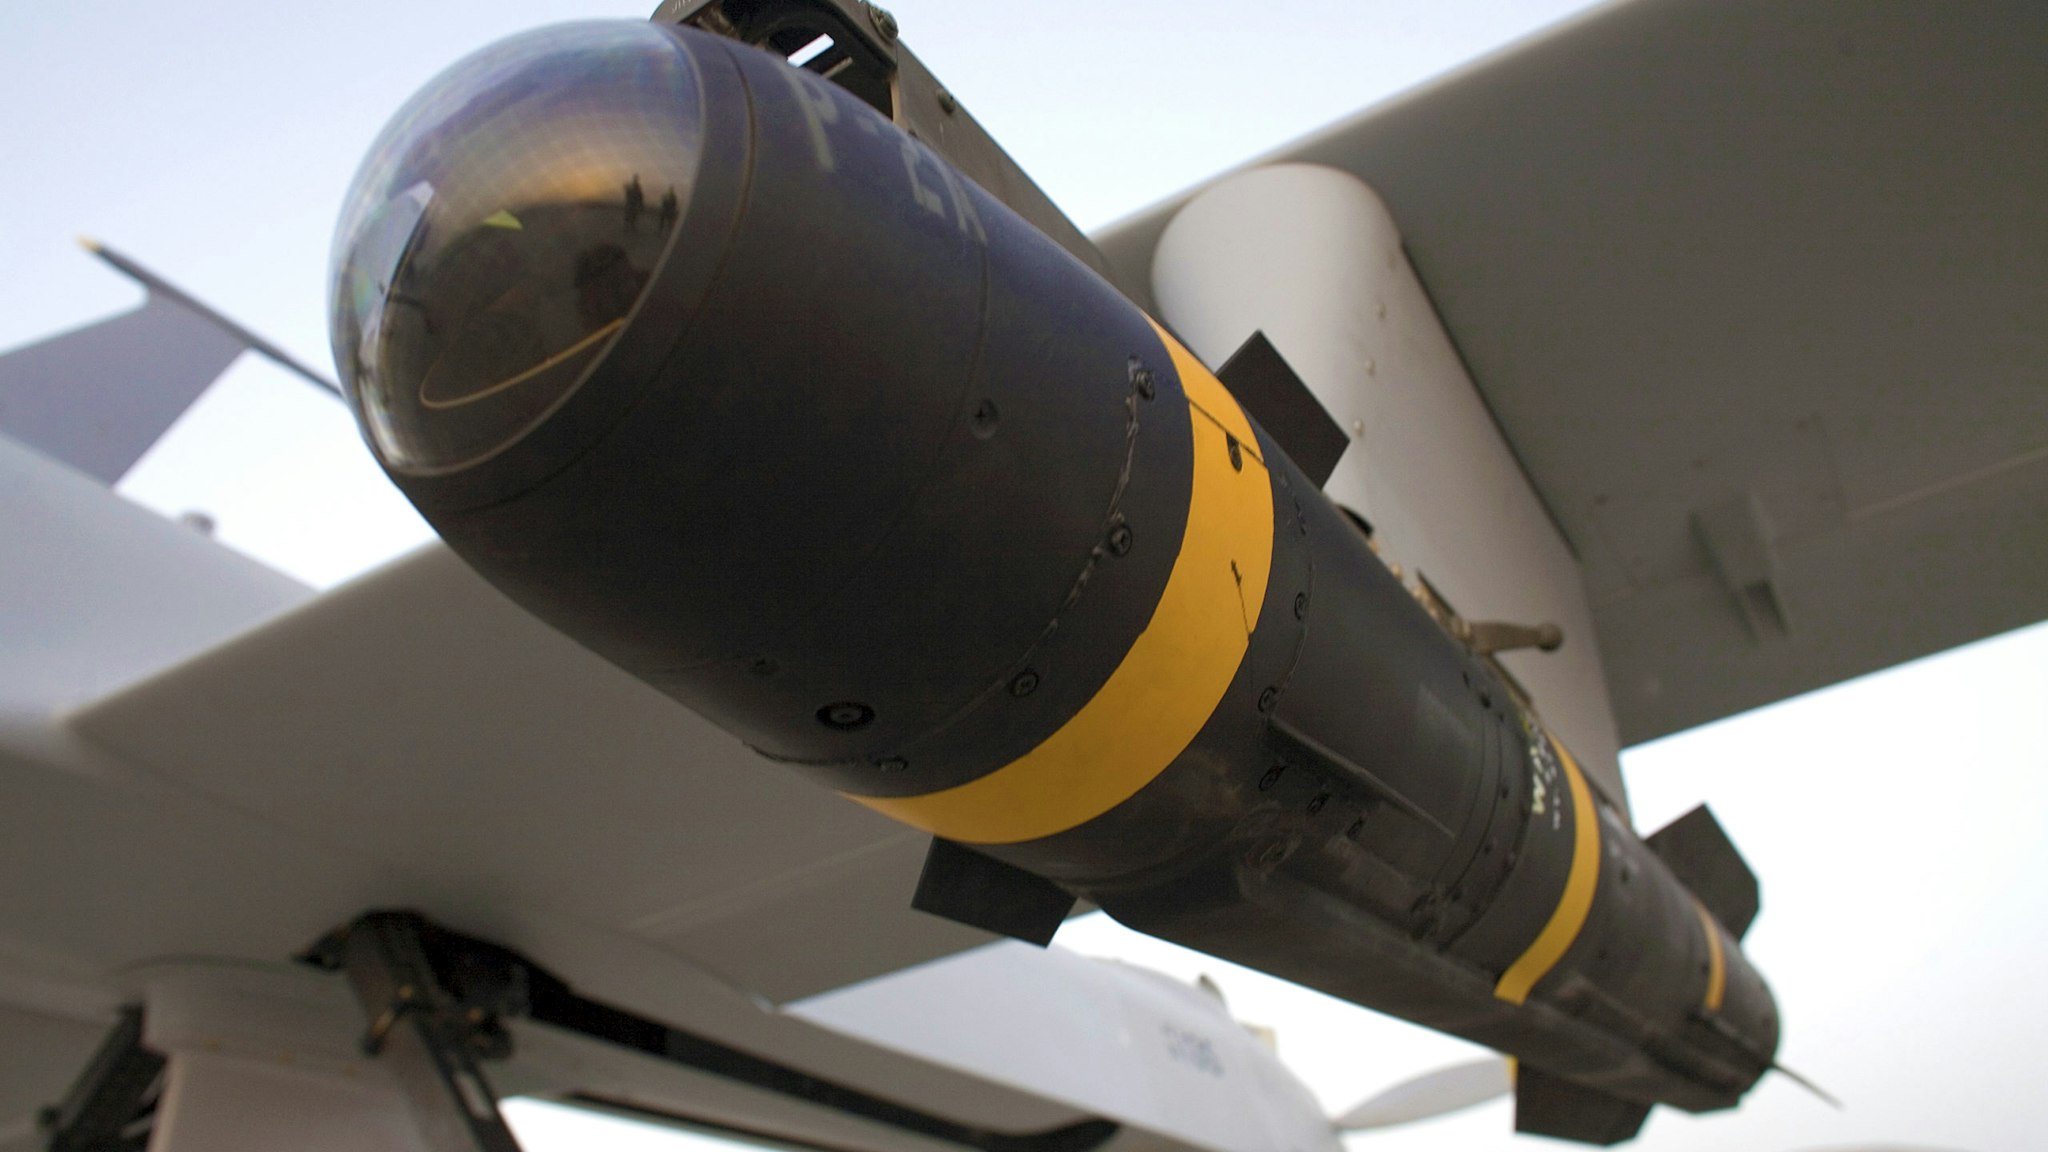 A Hellfire missile resting in the weapons bay of a US Air Force Predator drone aircraft. | Location: Kandahar Airfield, Kandahar, Afghanistan.